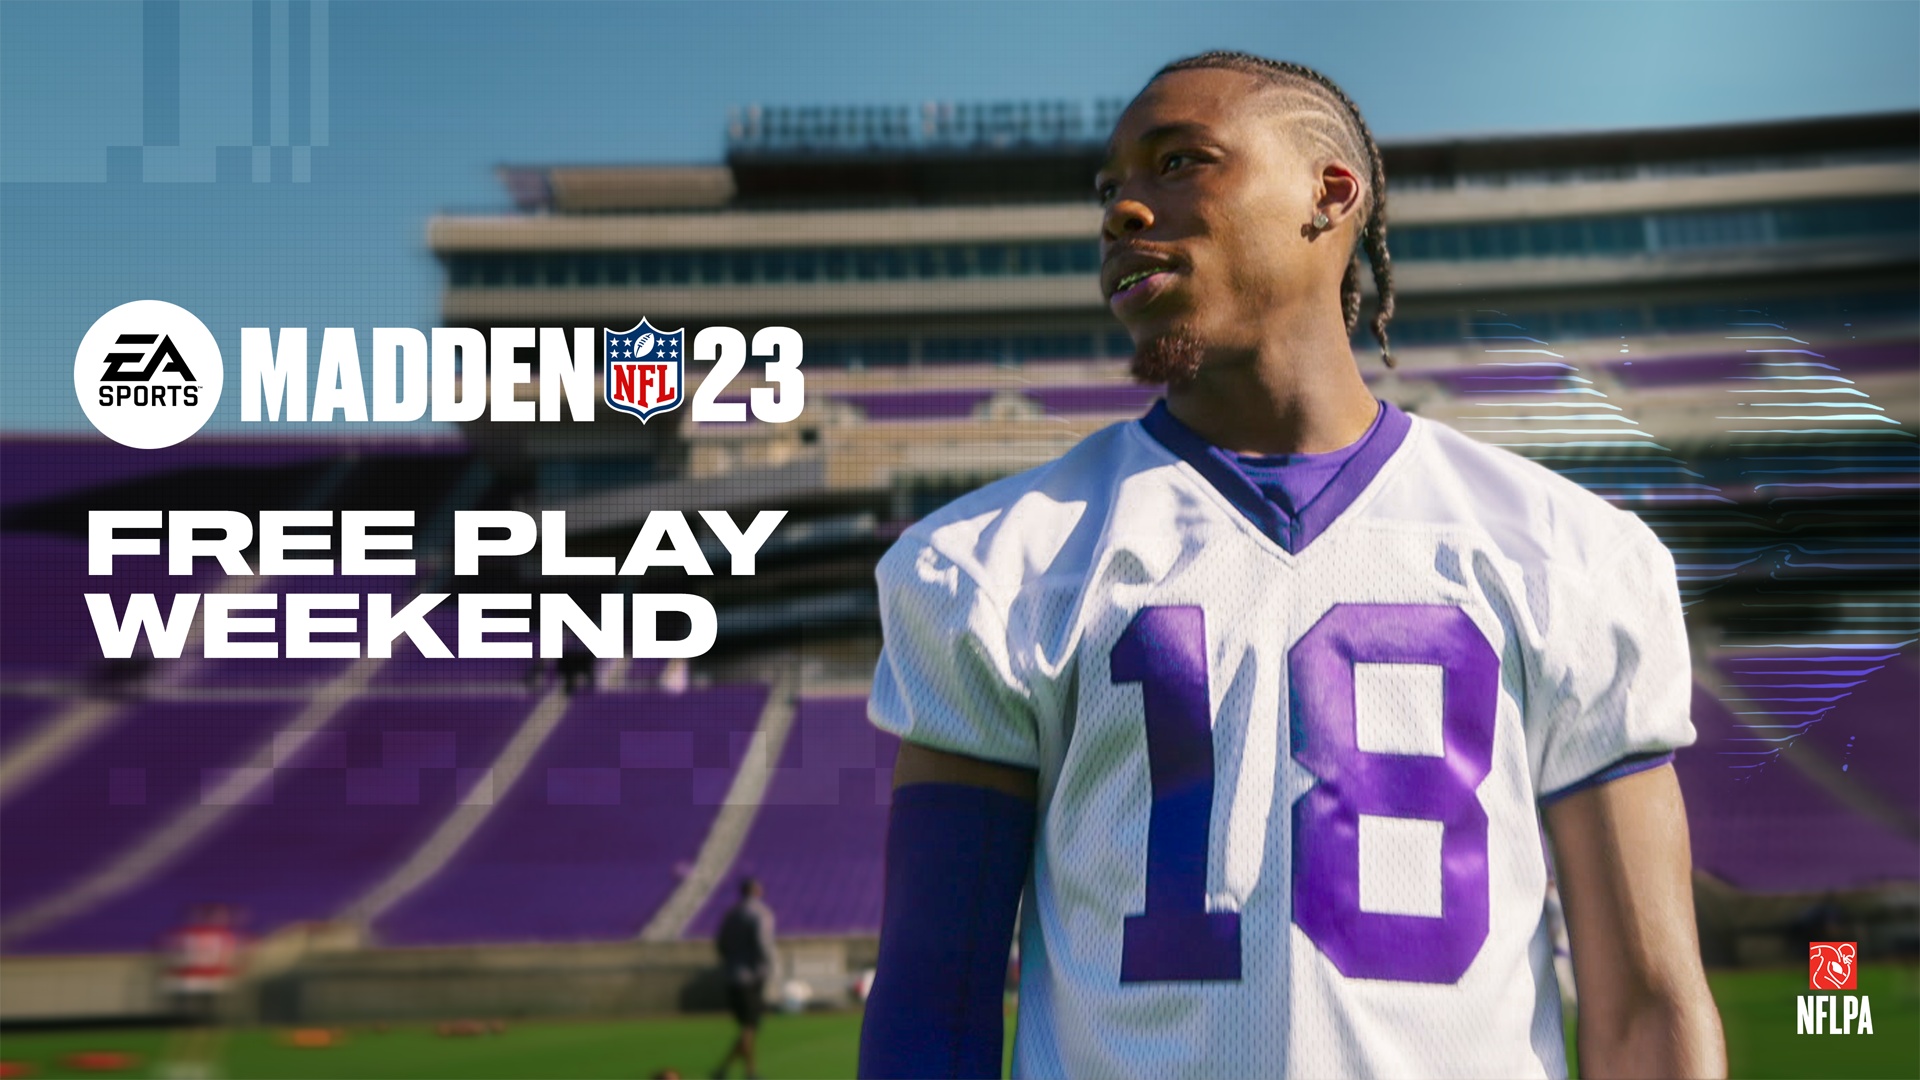 Madden NFL 23 Free Trial on Free Play Weekend Sept. 8-11 to